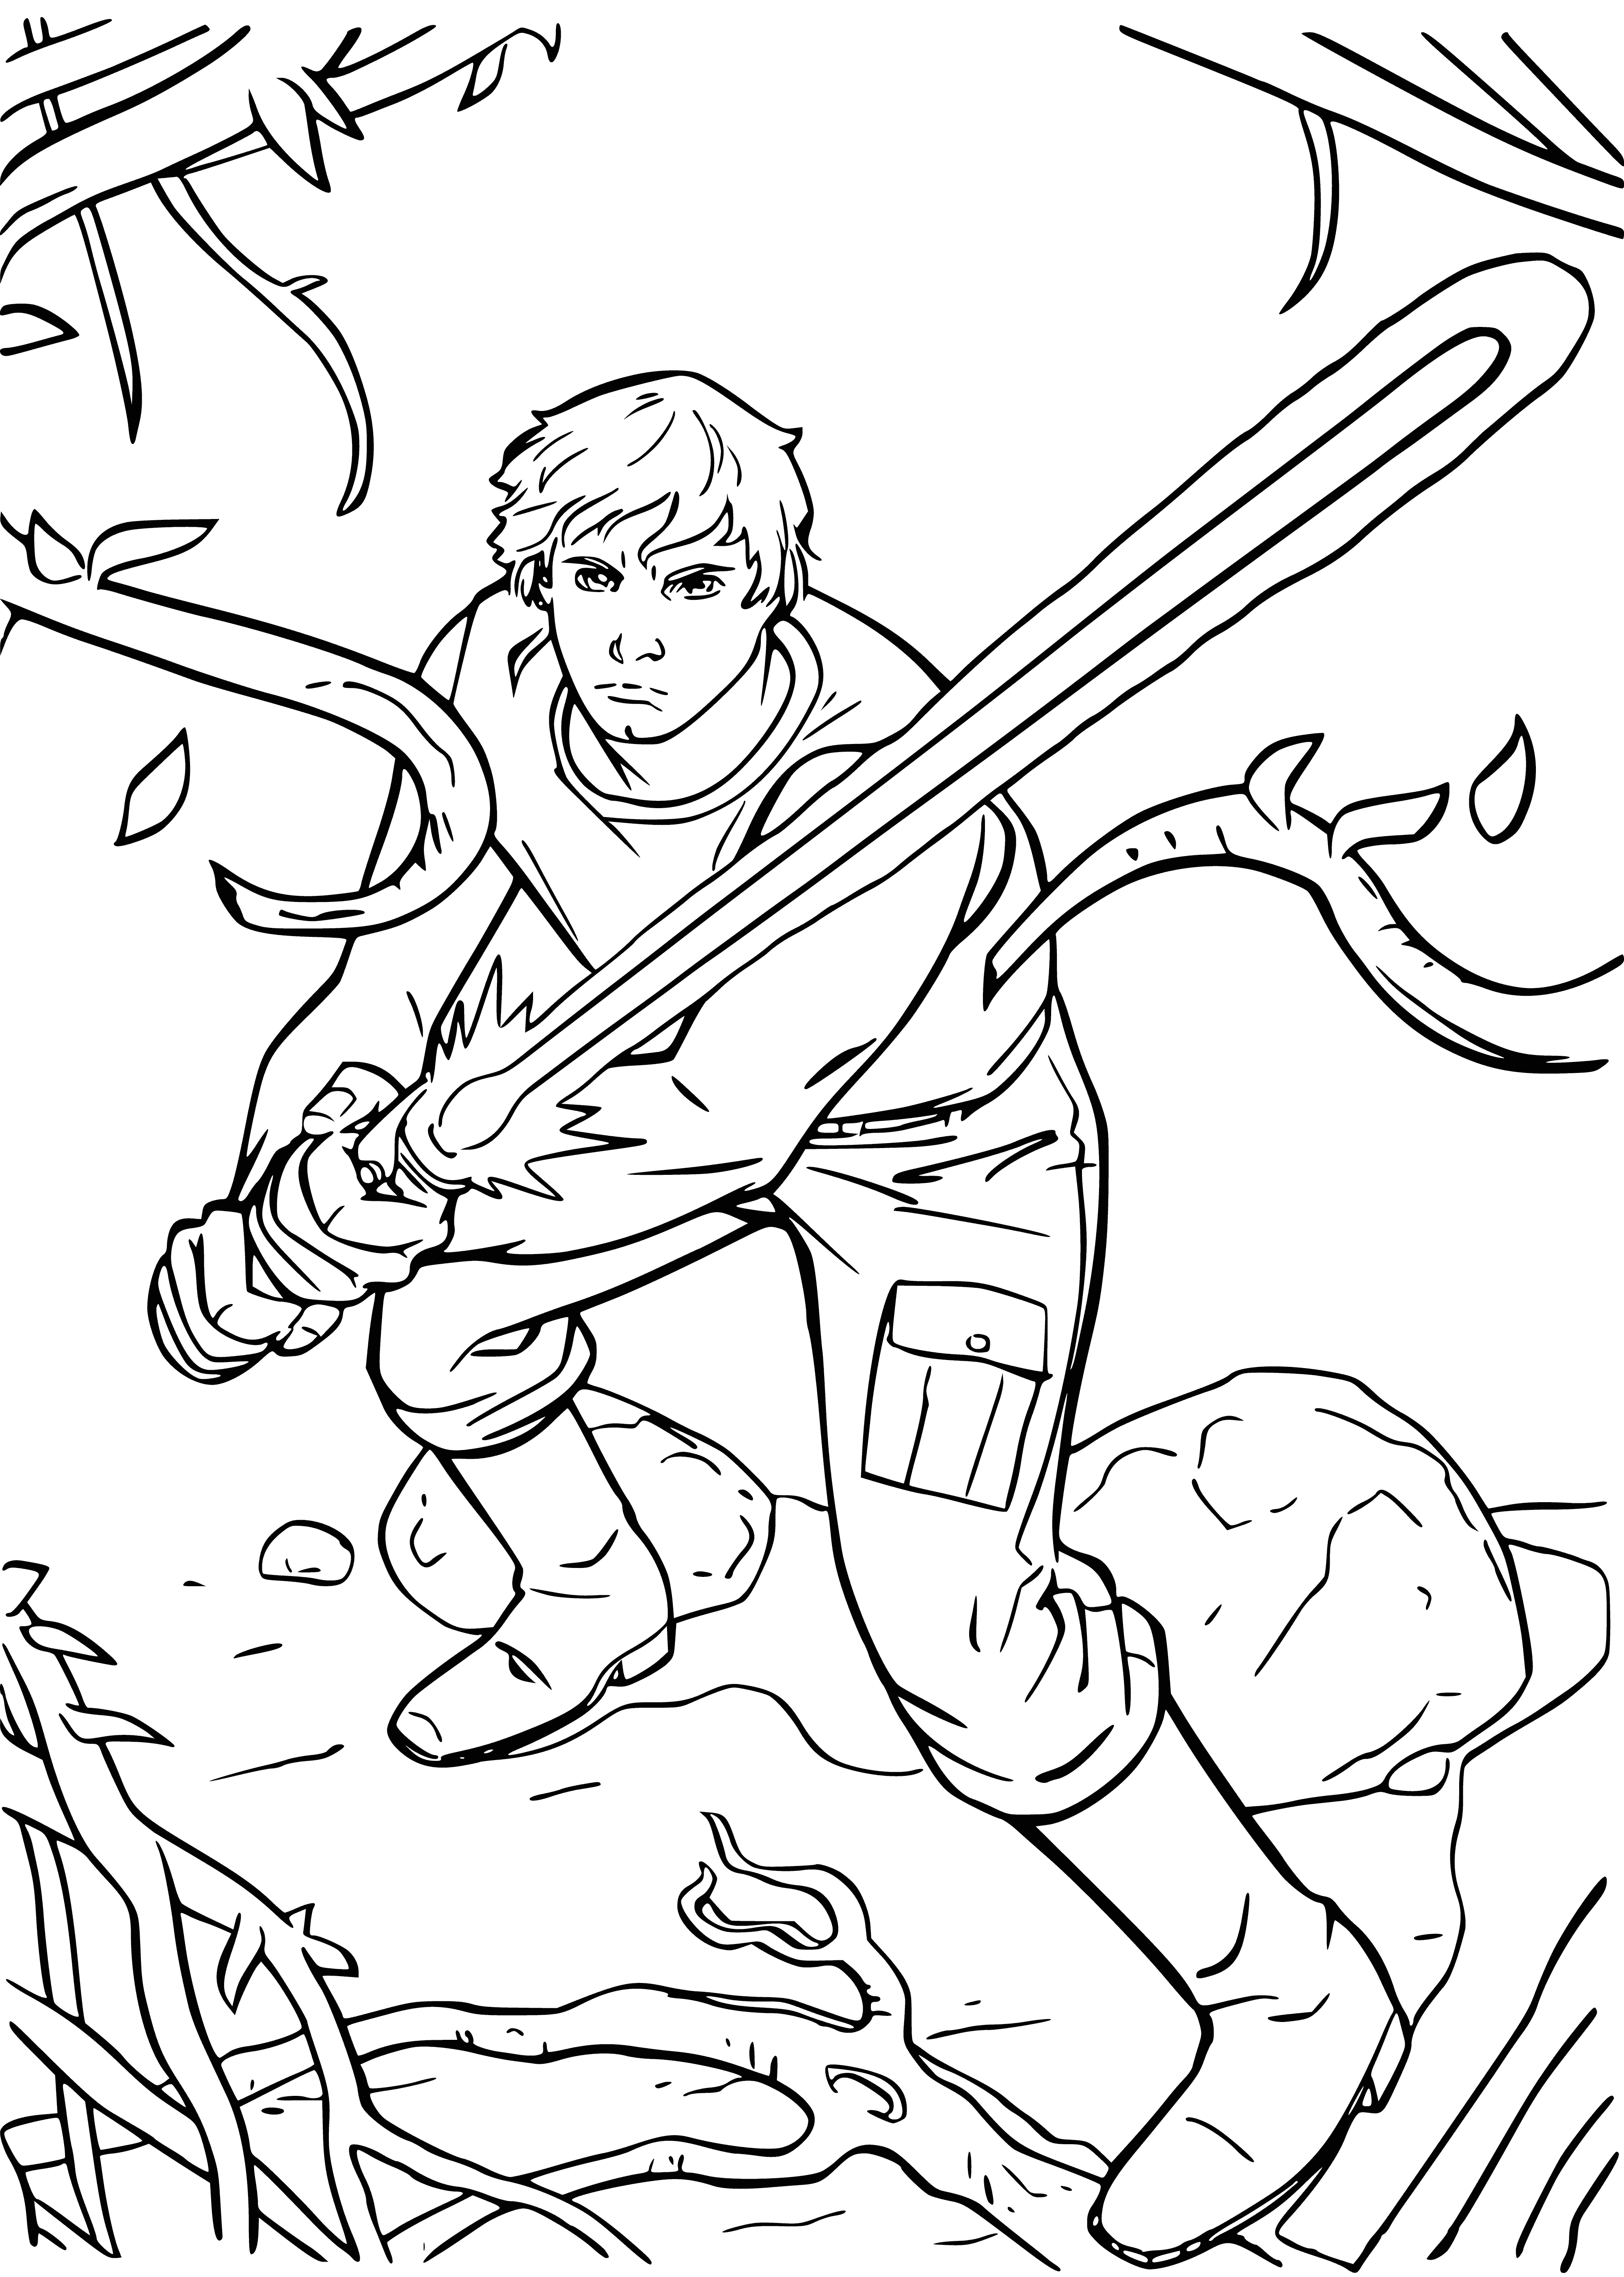 coloring page: Luke Skywalker stands in snow, lightsaber in right hand, ready to fight. Behind him a Star Destroyer looms in the darkness.